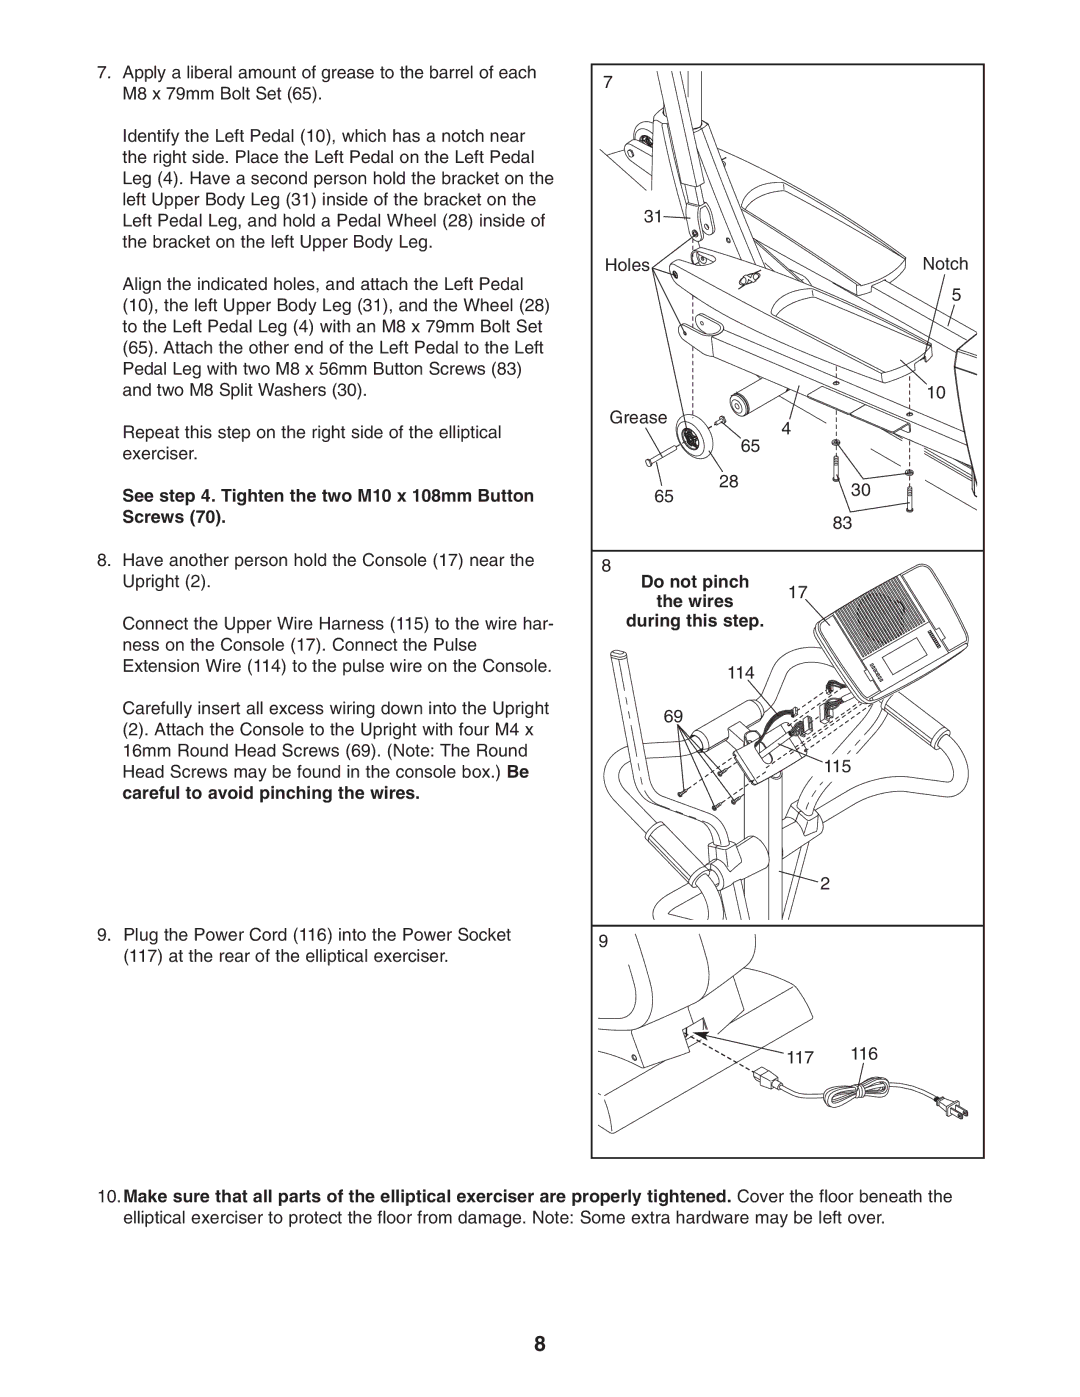 NordicTrack NEL70950 user manual See . Tighten the two M10 x 108mm Button Screws, Do not pinch Wires During this step 